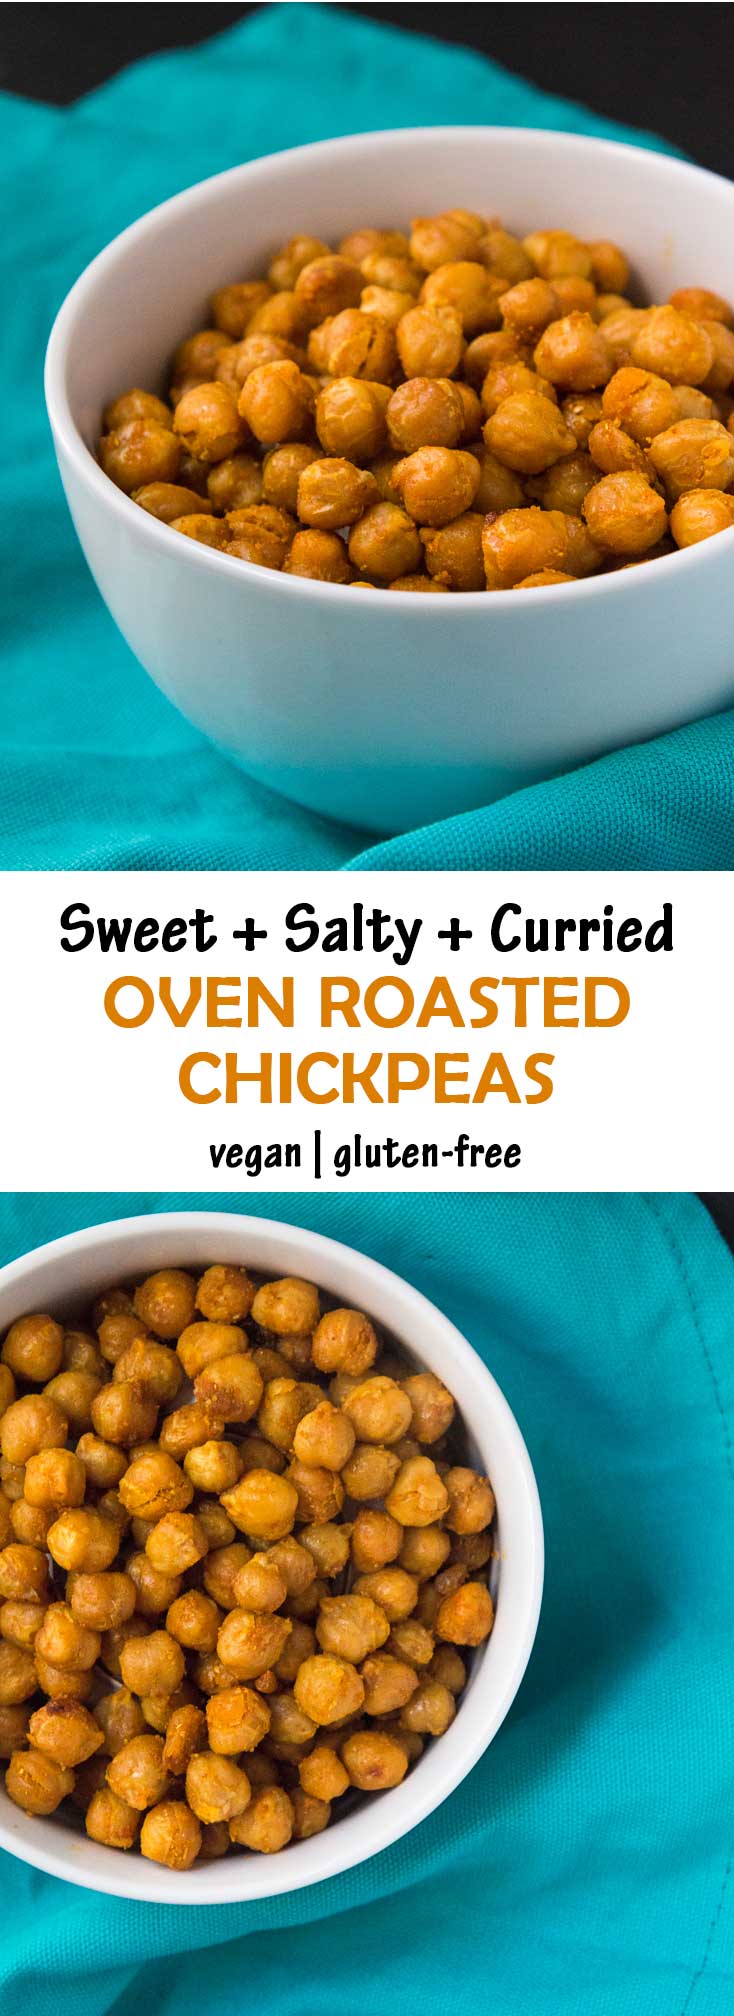 These Sweet & Salty Oven Roasted Curried Chickpeas are the perfect side dish, appetizer, or delicious snack to munch on! #vegan #glutenfree | www.Vegetariangastronomy.com